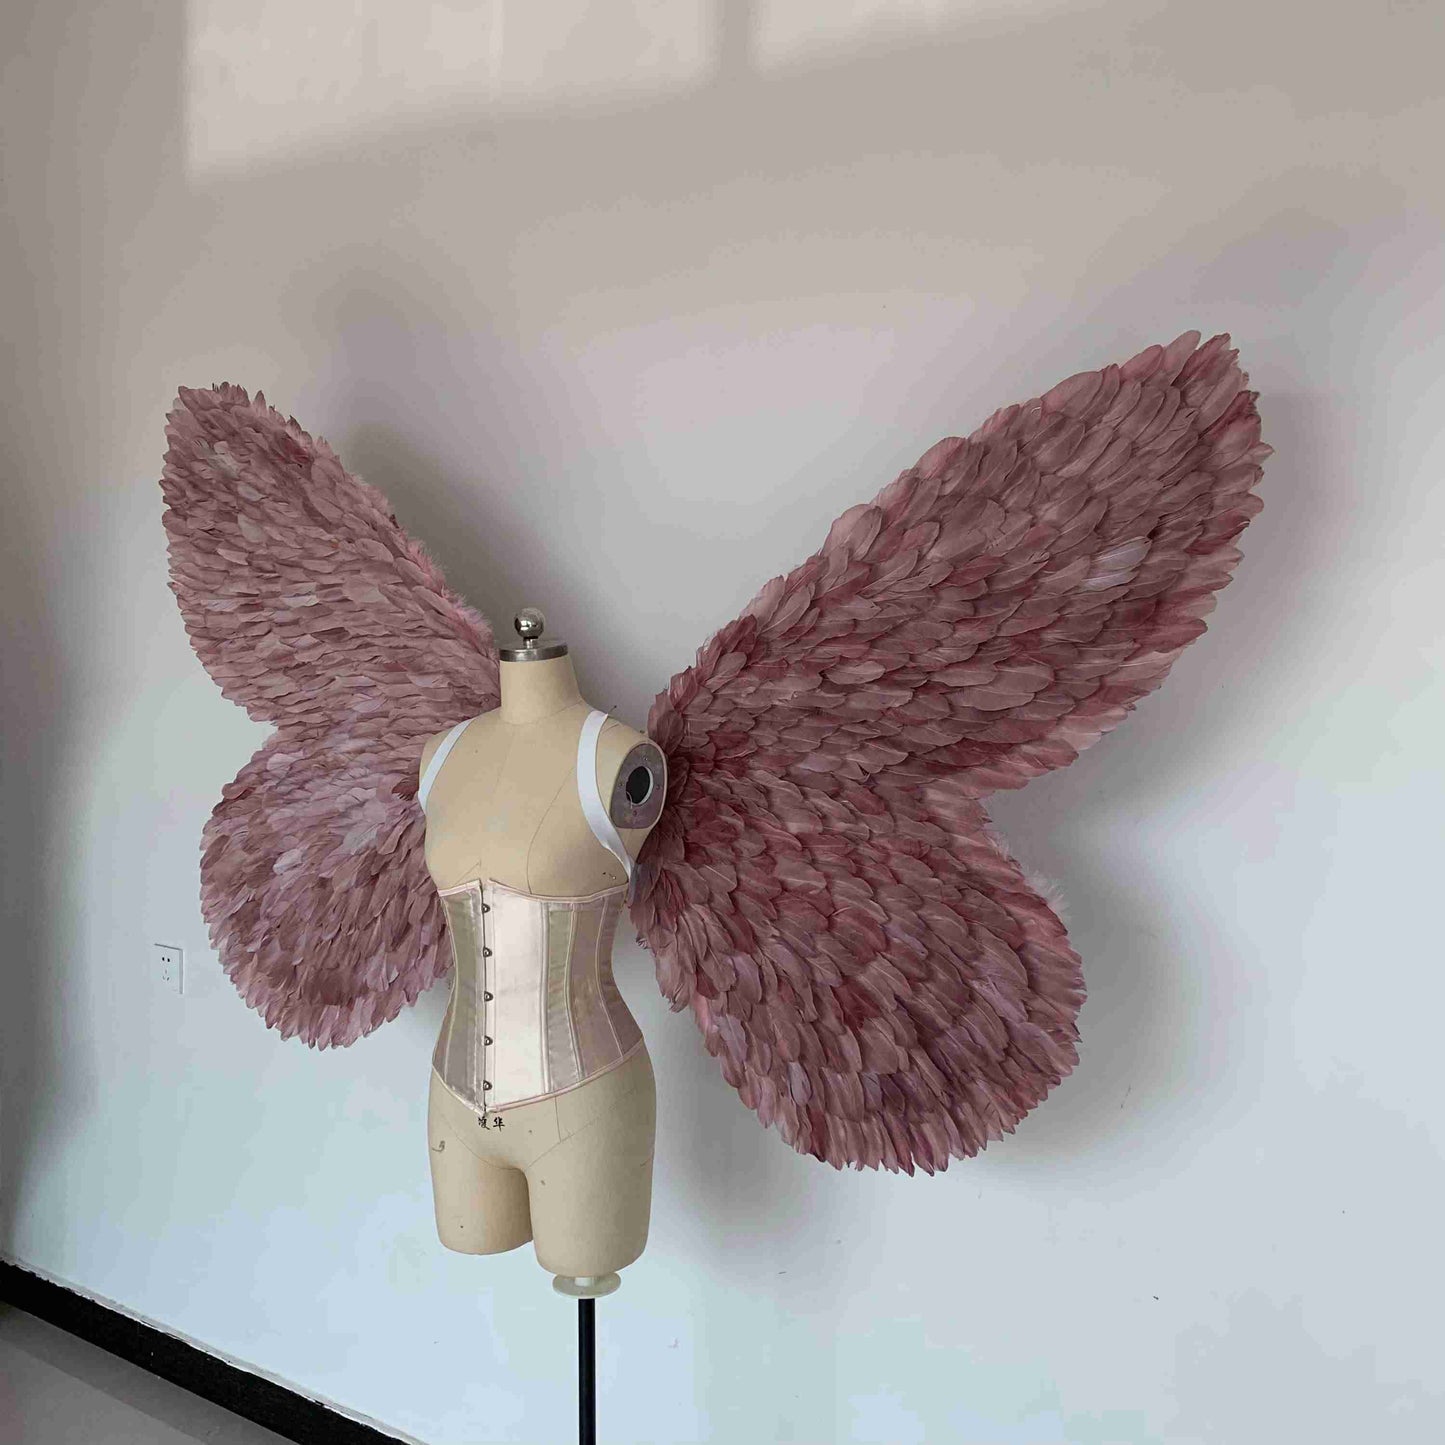 Our purple color butterfly wings from the left side. Made from goose feathers. Wings for butterfly, pixie, and fairy costumes. Suitable for photoshoots.